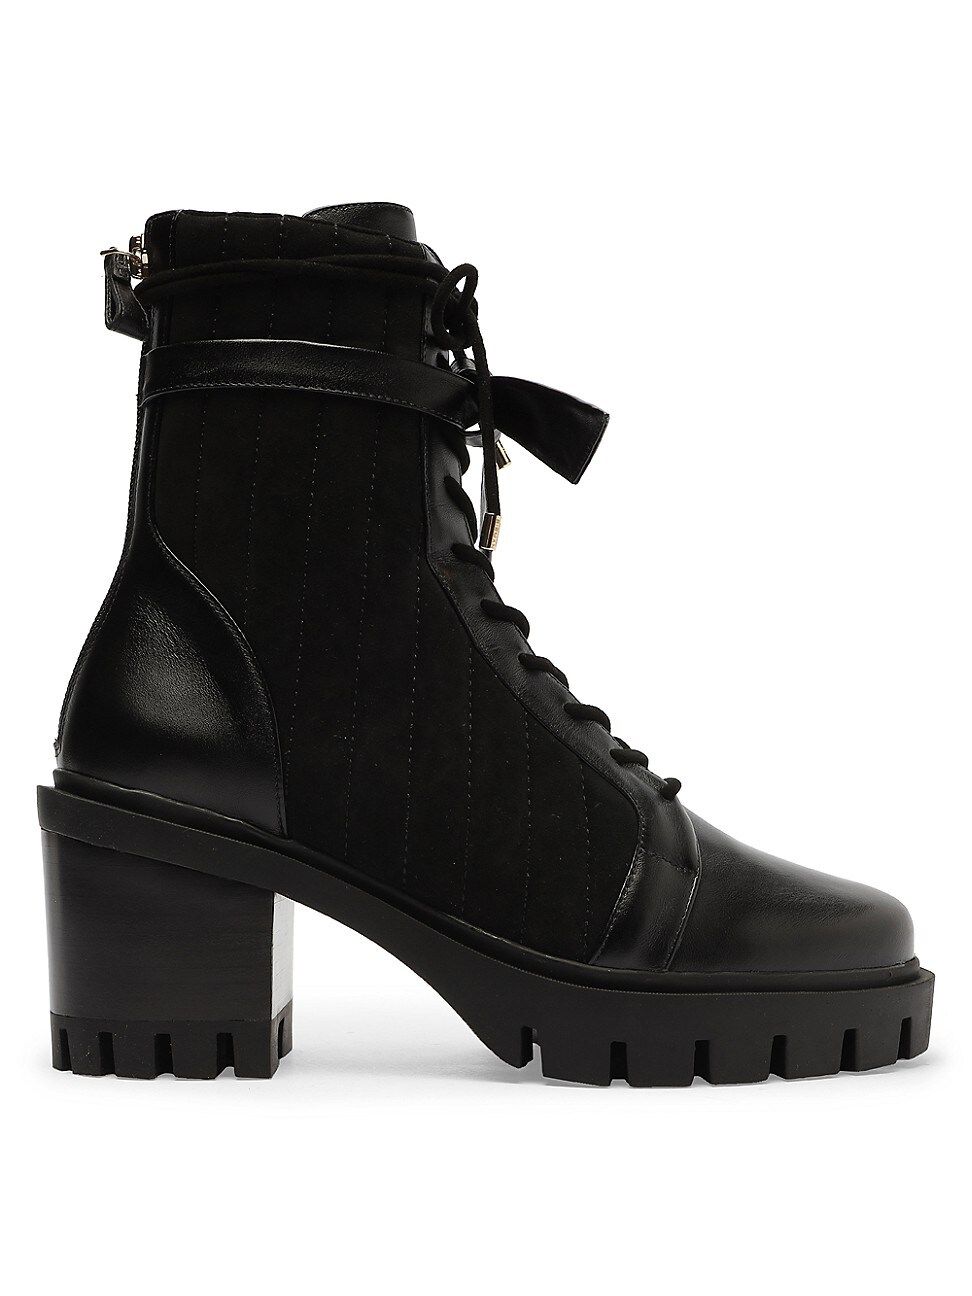 Women's Clarita Quilted Leather Combat Lug-Sole Boots - Black - Size 10 | Saks Fifth Avenue